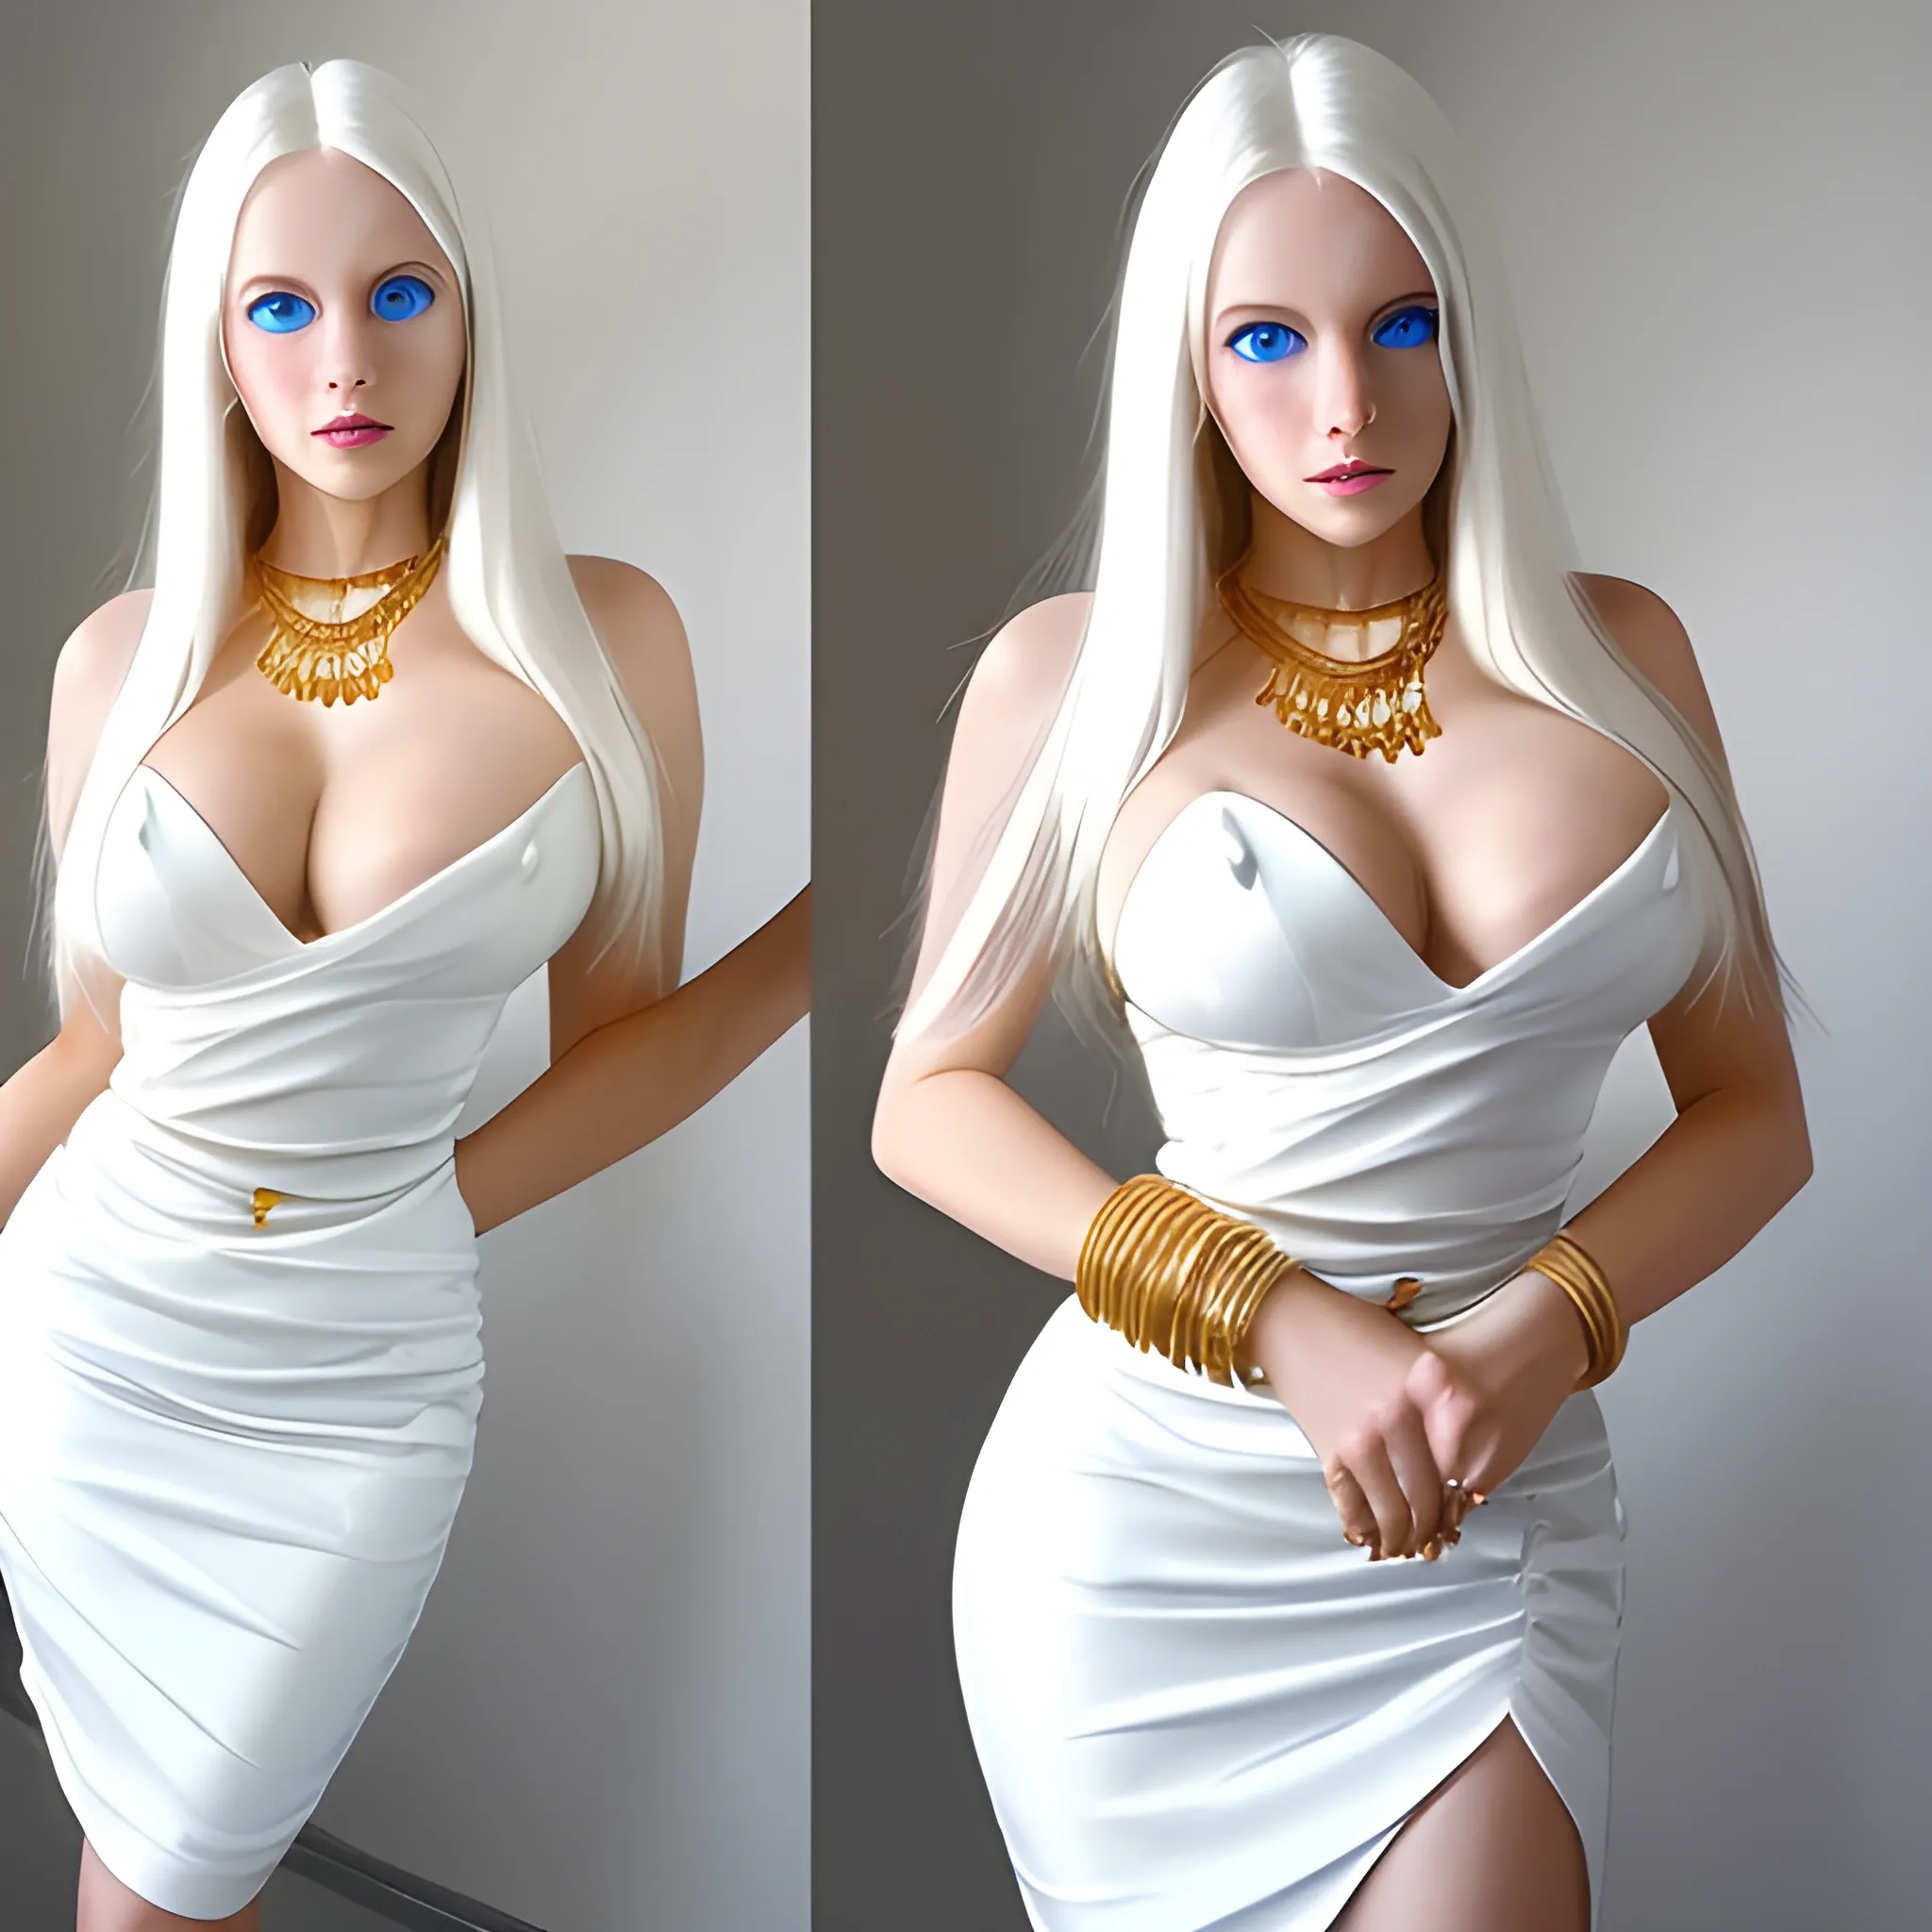 woman, white straight hair, blue eyes, D cup breast, six pack, wide hips, white elegant dress, white heels, gold bangles, gold necklace